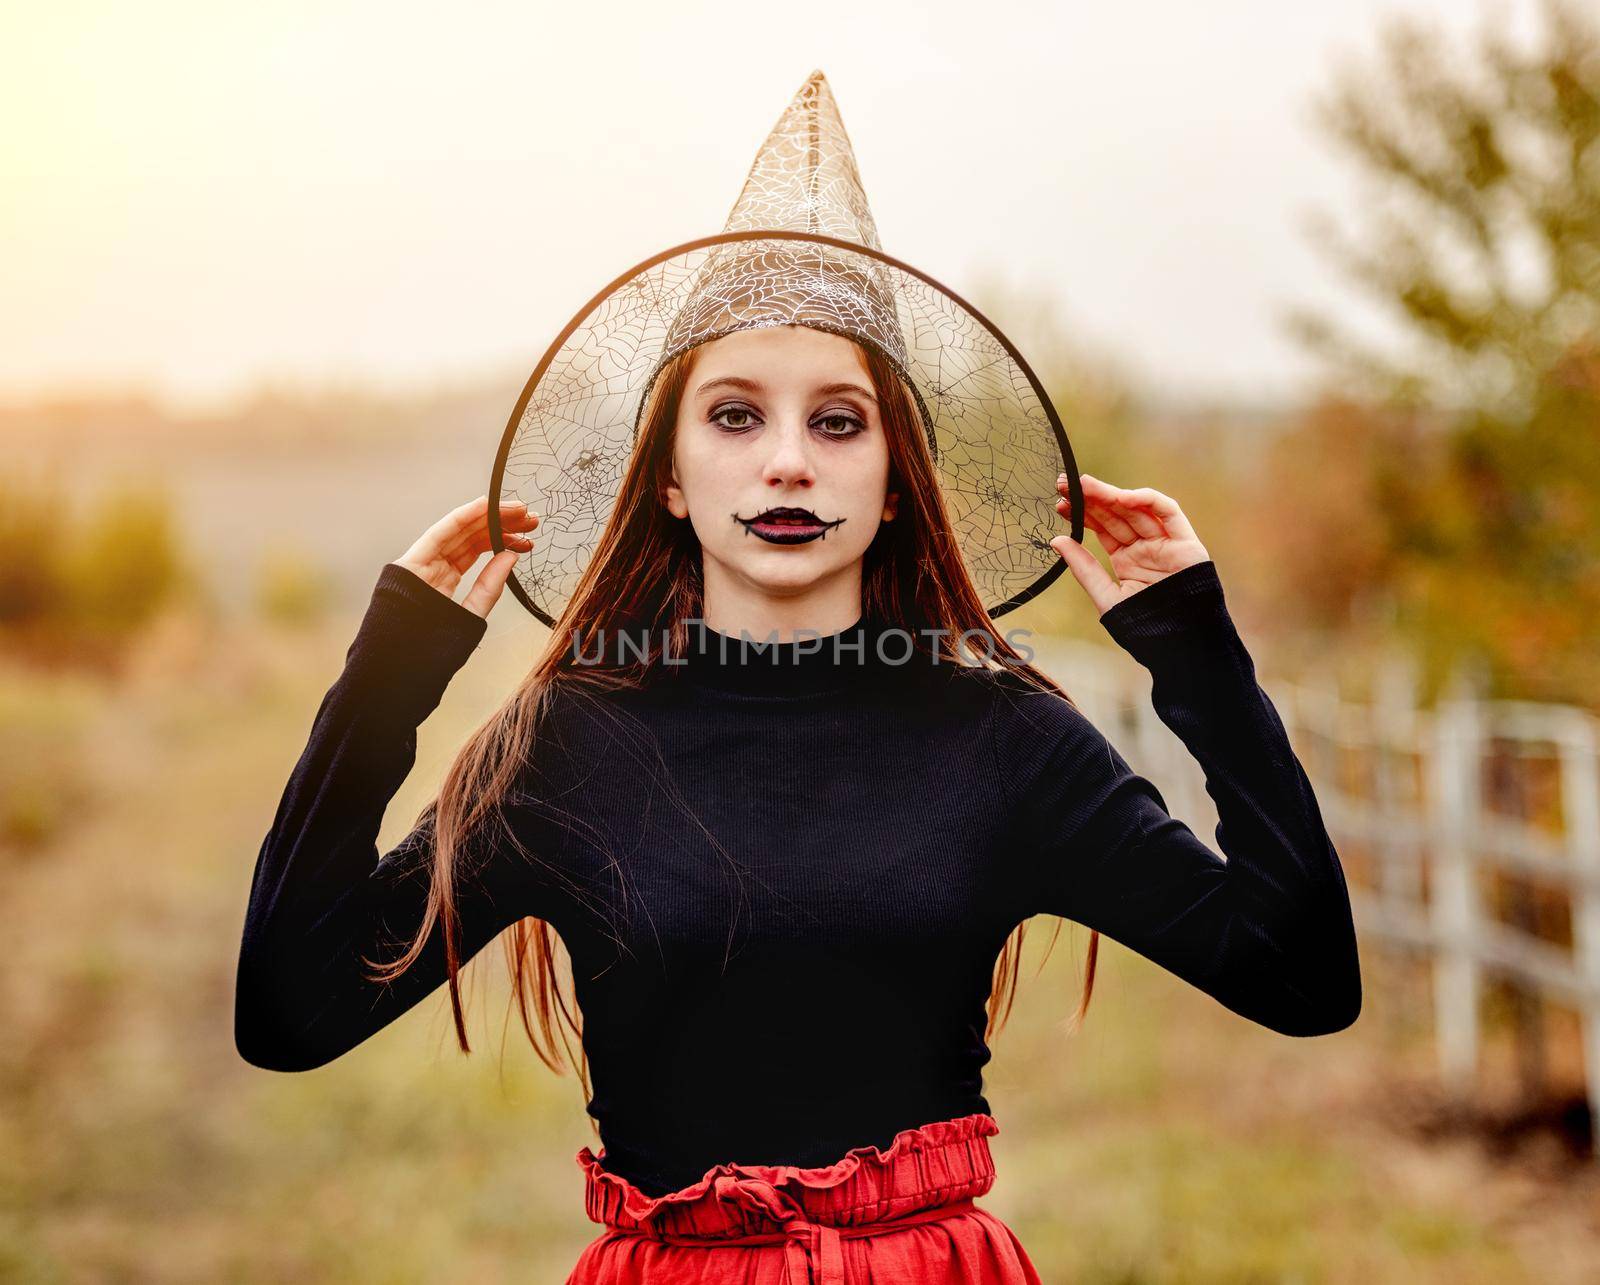 halloween portrait of teenage girl in witch hat smiling at camera on nature background